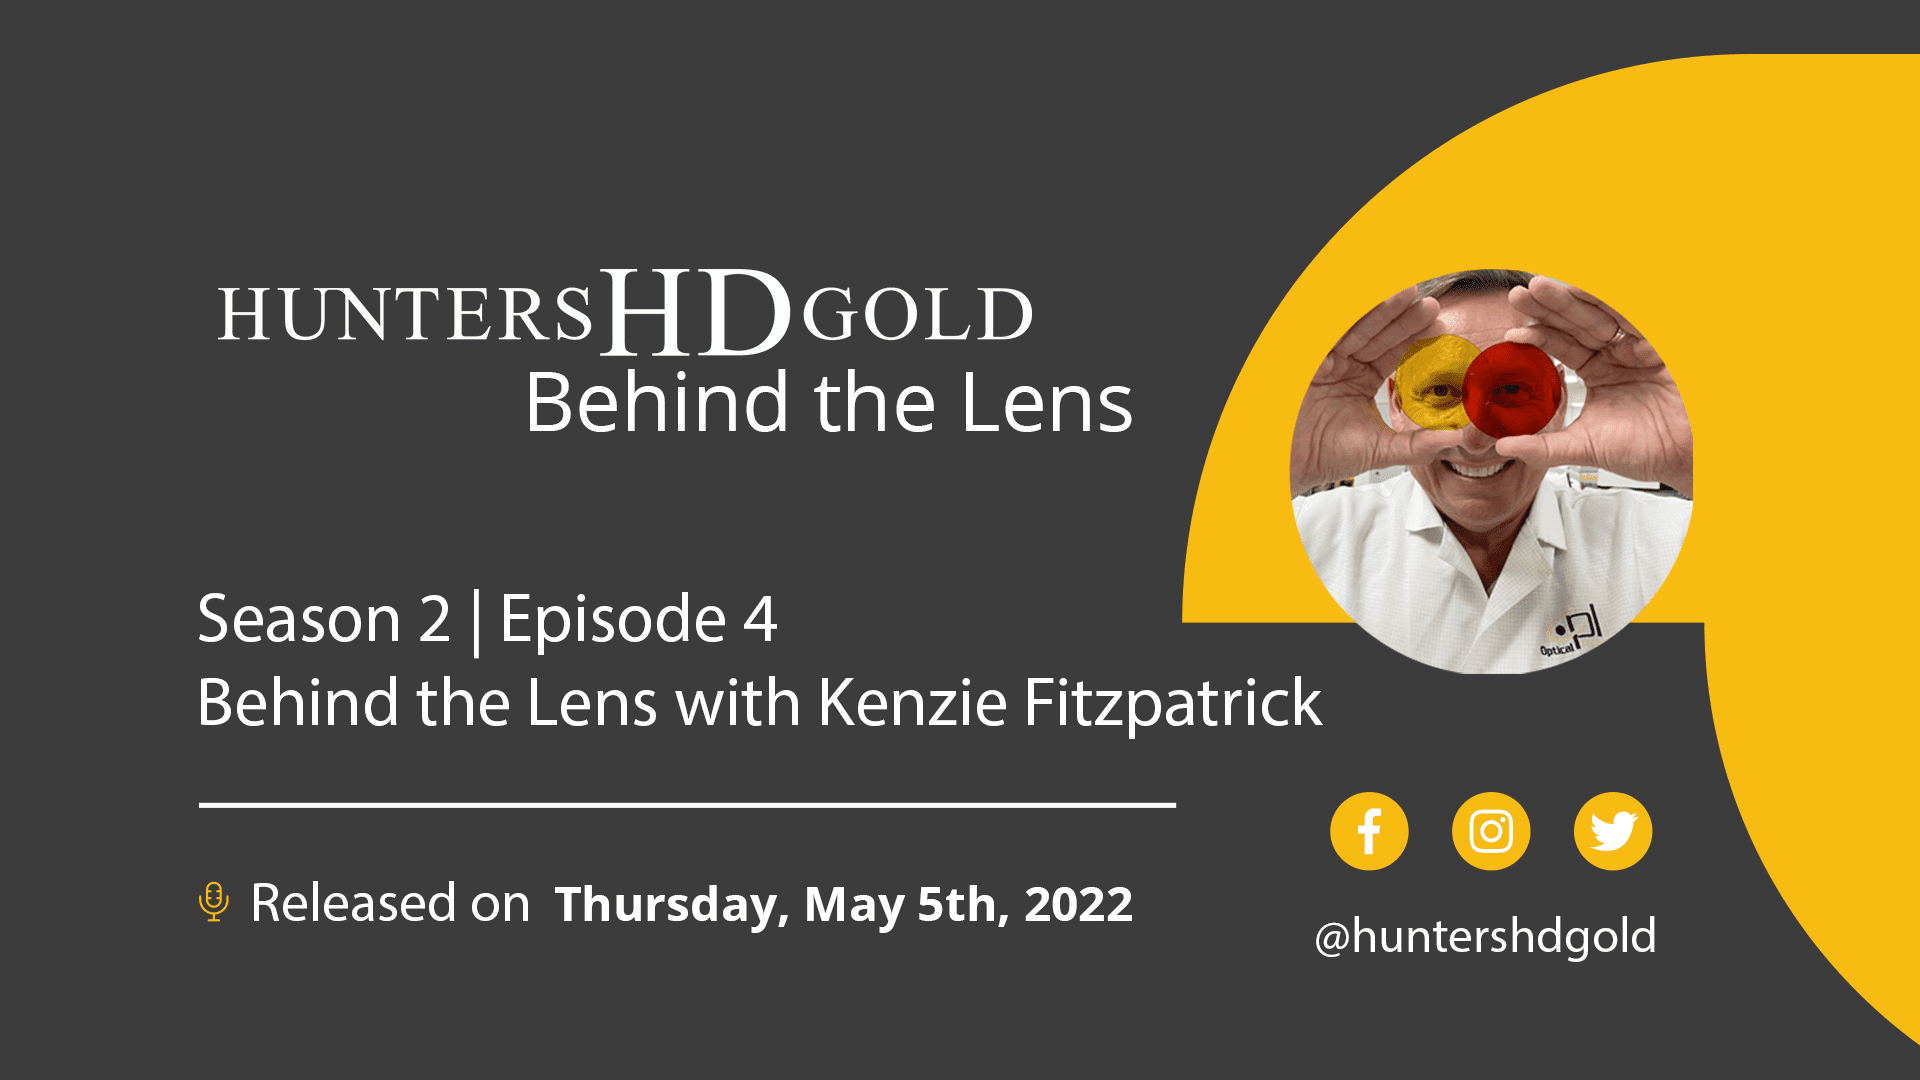 Listen to Kenzie on the Behind the Lens Podcast Hosted by Hunters HD Gold